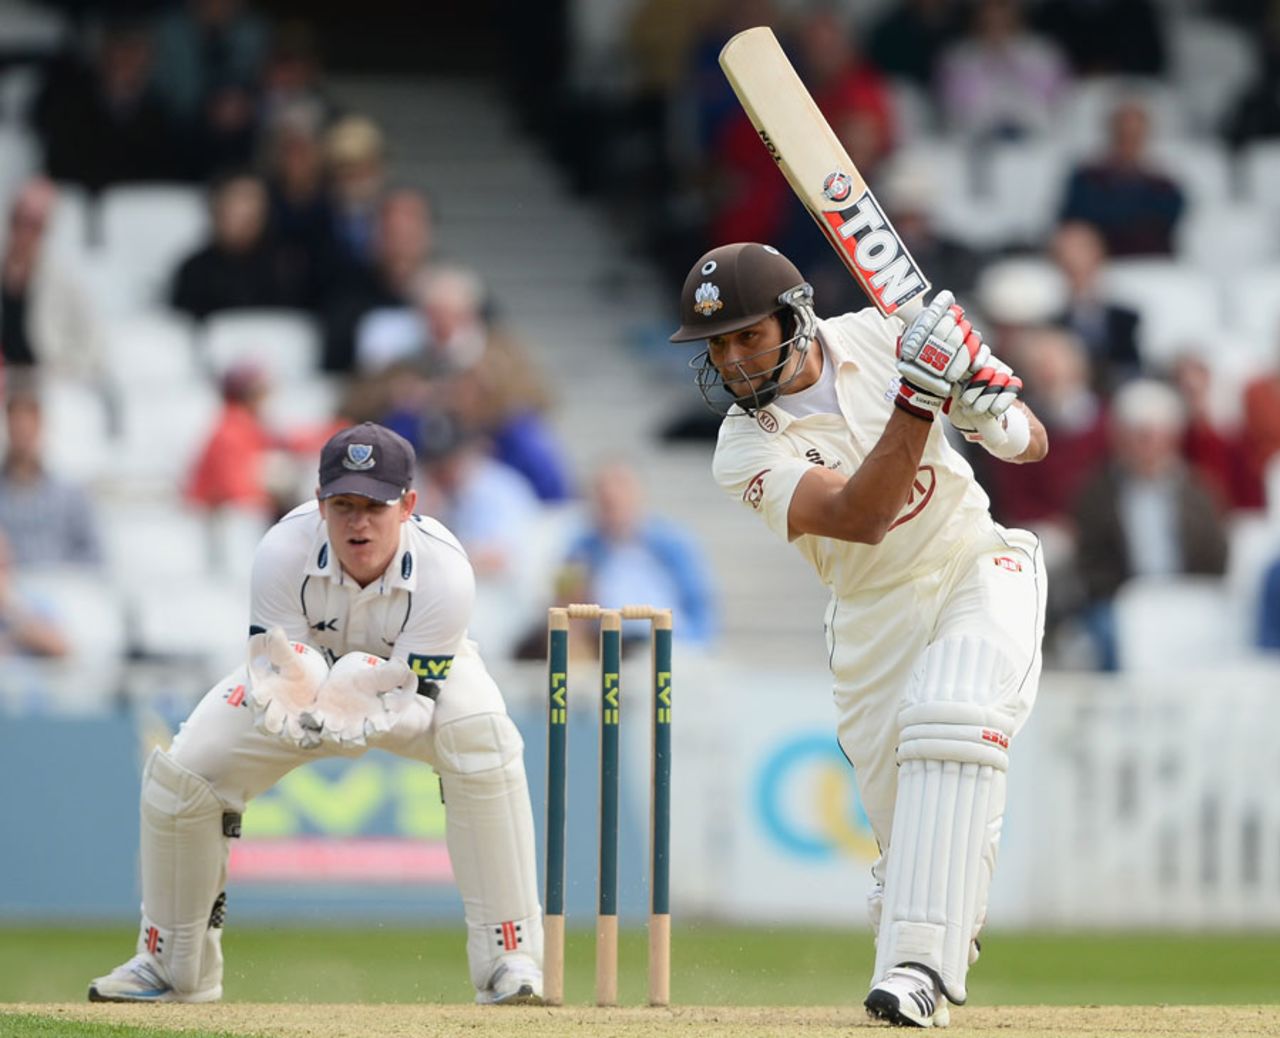 Vikram Solanki scored a half-century, Surrey v Sussex, County Championship, Division One, The Oval, 1st day, April, 24, 2013